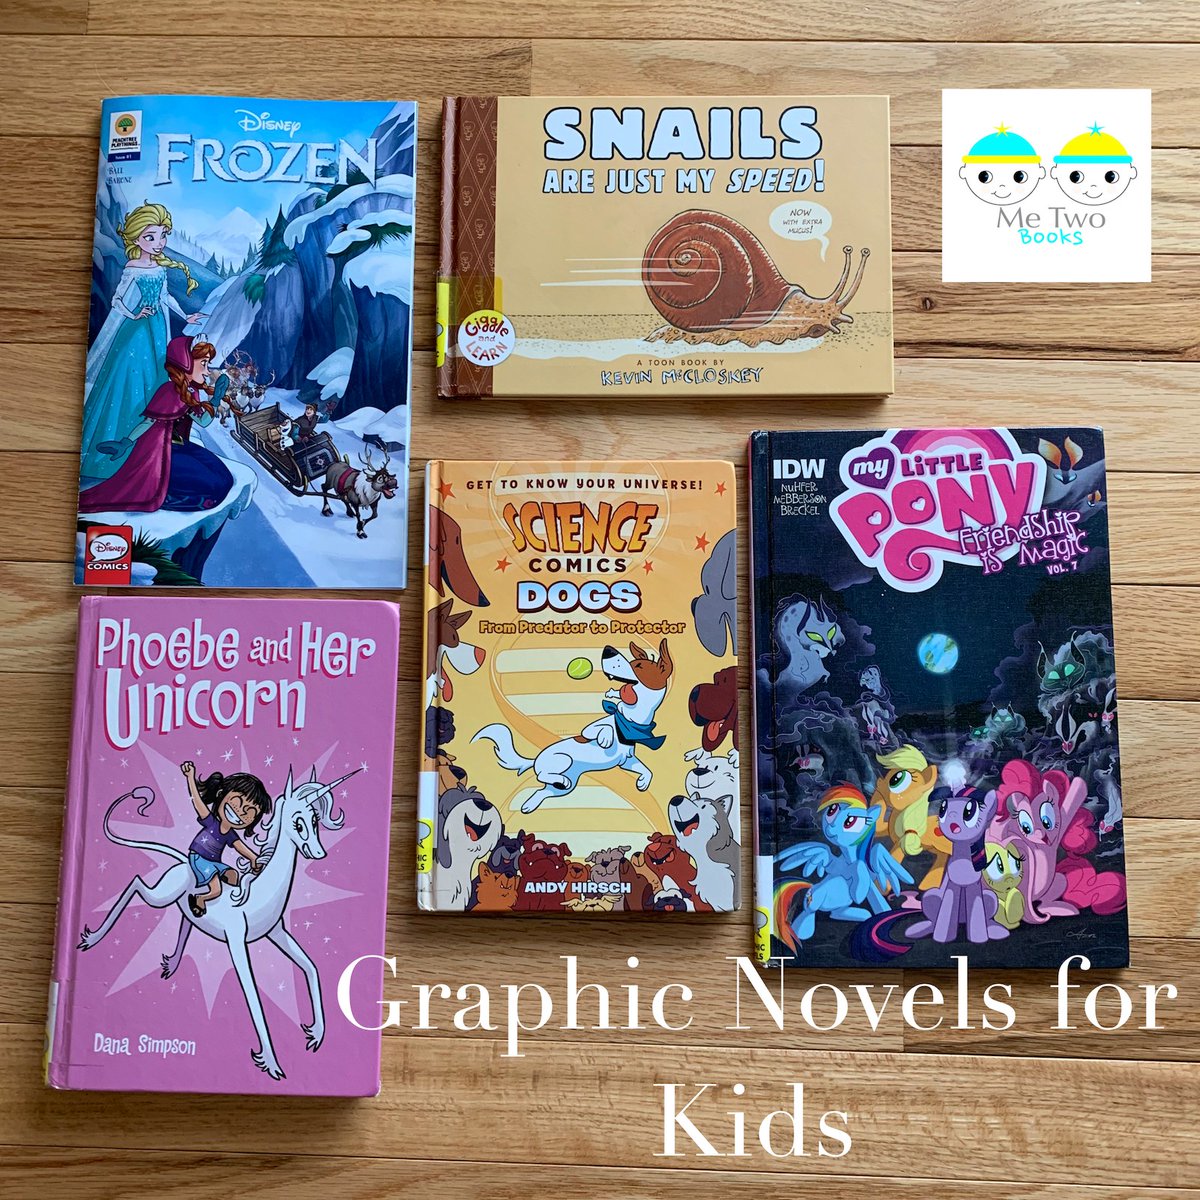 Forget the grocery hauls, here is the haul I love the most. Check out what we checked out from the library! 
…
#metwobooks #libraryhaul #bookstagram #childrensbooks #selfpublished #comicbooks #graphicnovelsforkids